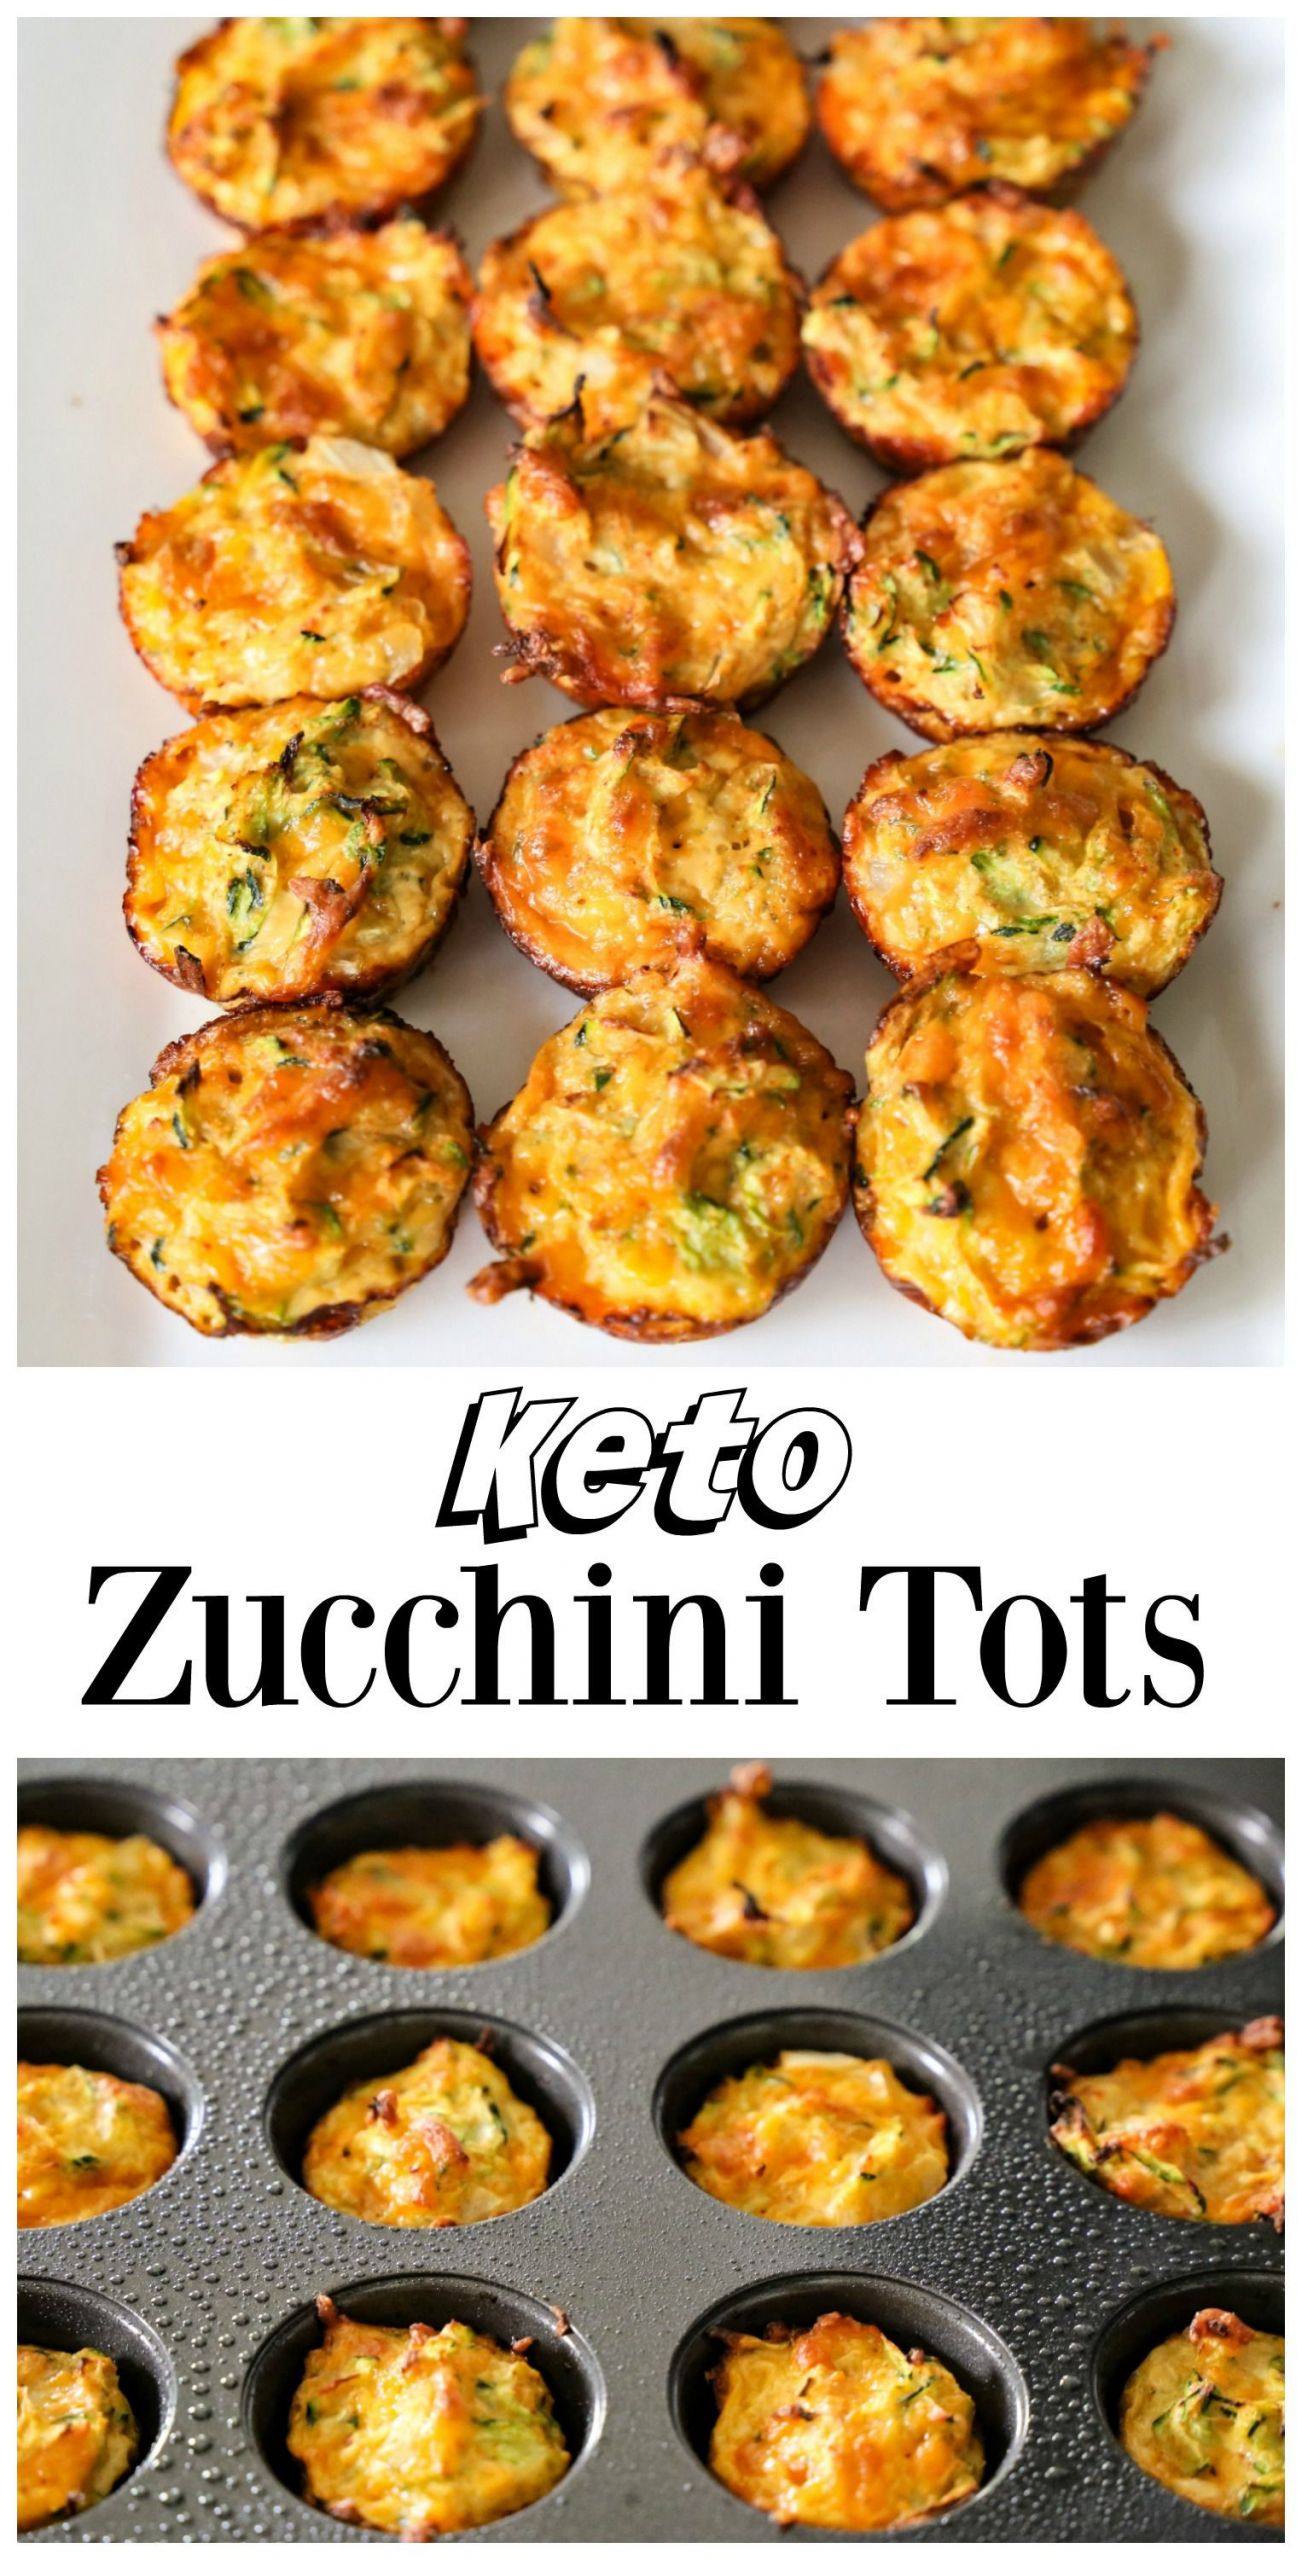 Zucchini Keto Side Dish
 These simple keto Zucchini Tots make a great low carb